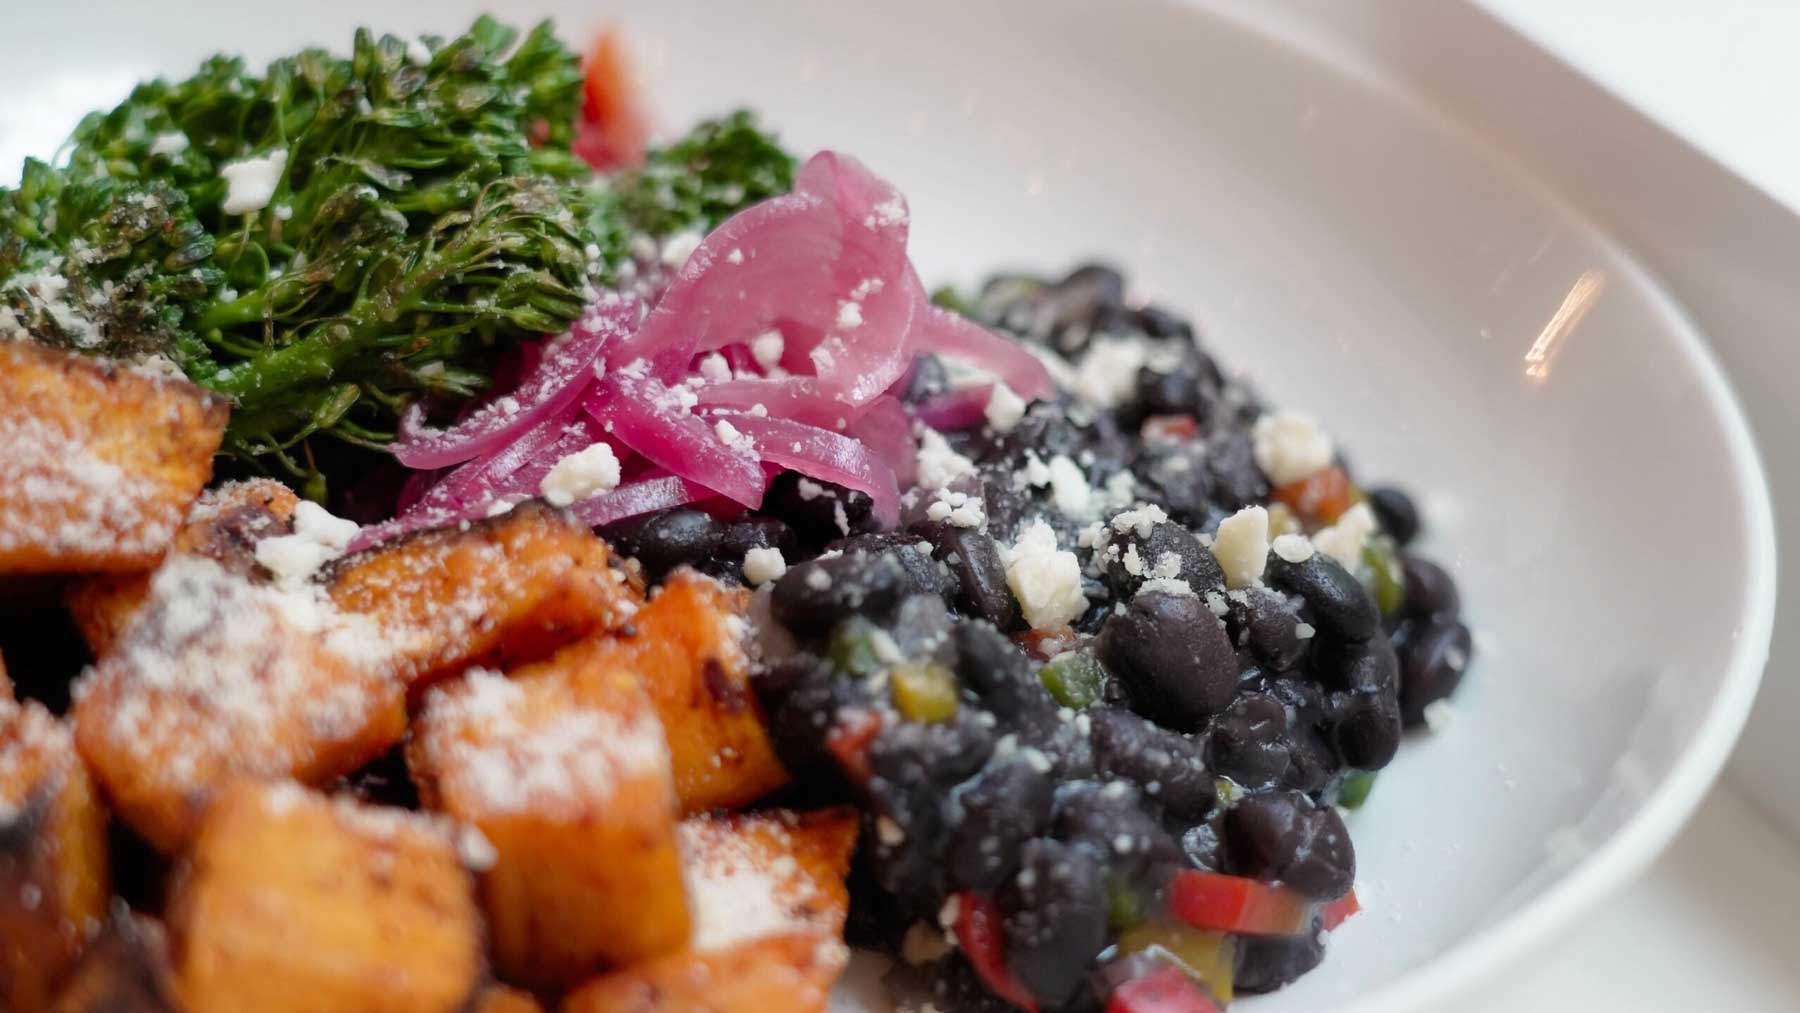 Healthy Food Photo Gallery: Roasted Sweet Potato and Black Bean Bowl with Pickled Onions